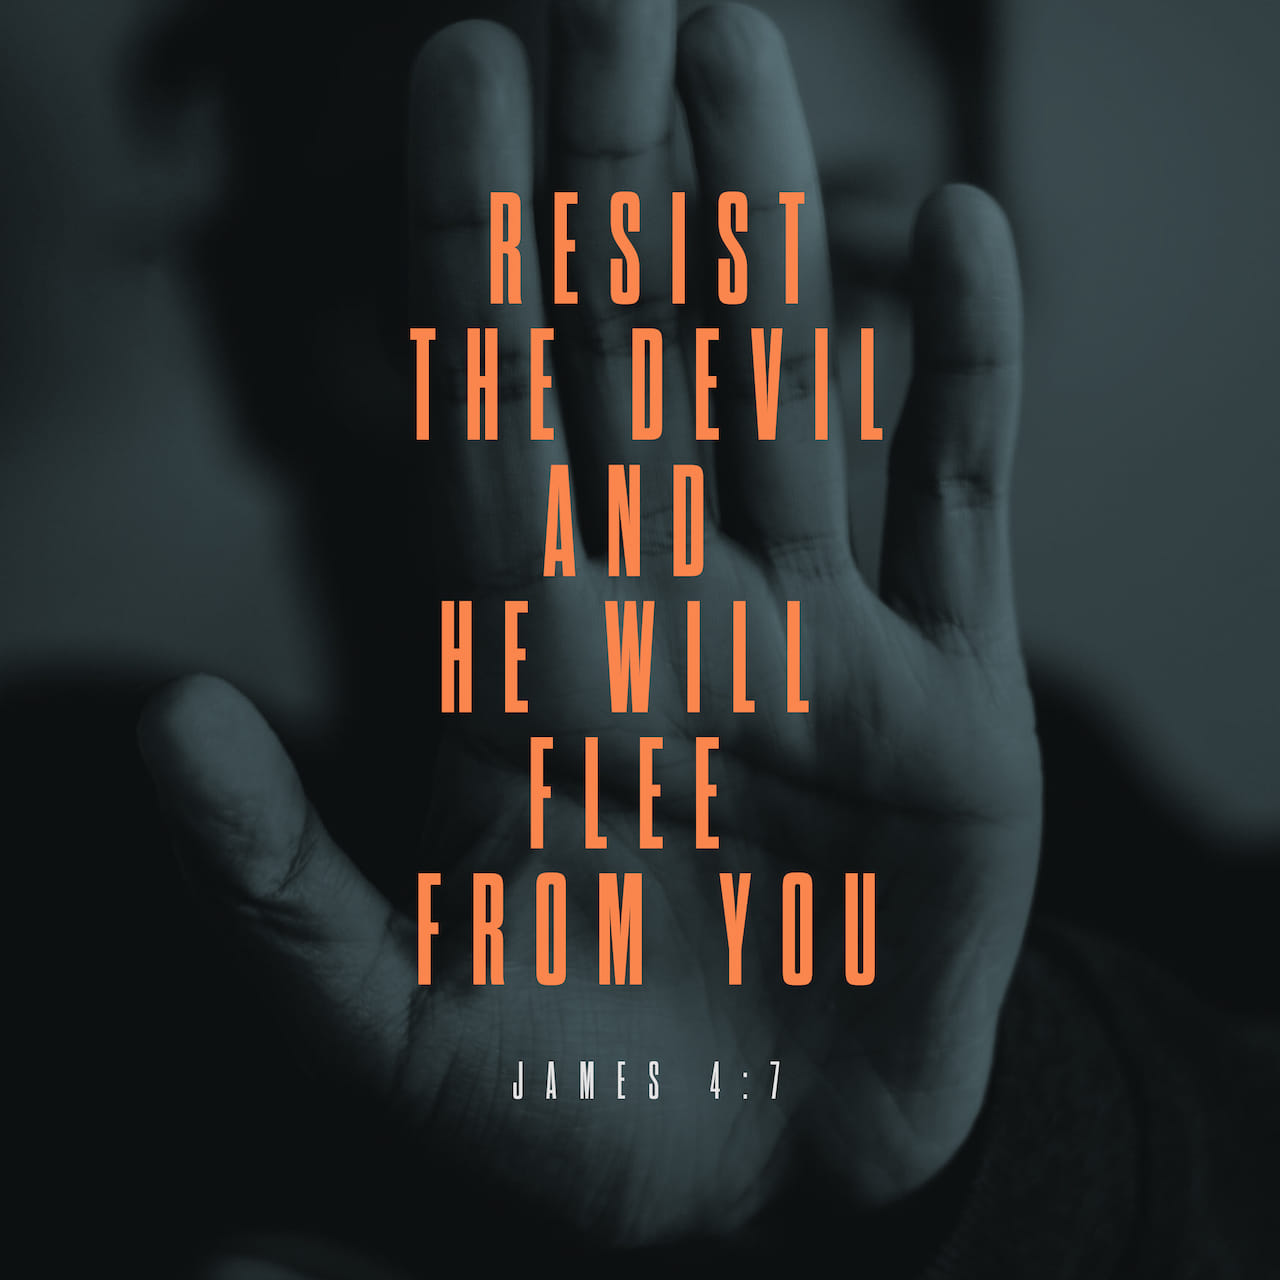 James 478 Submit yourselves therefore to God. Resist the